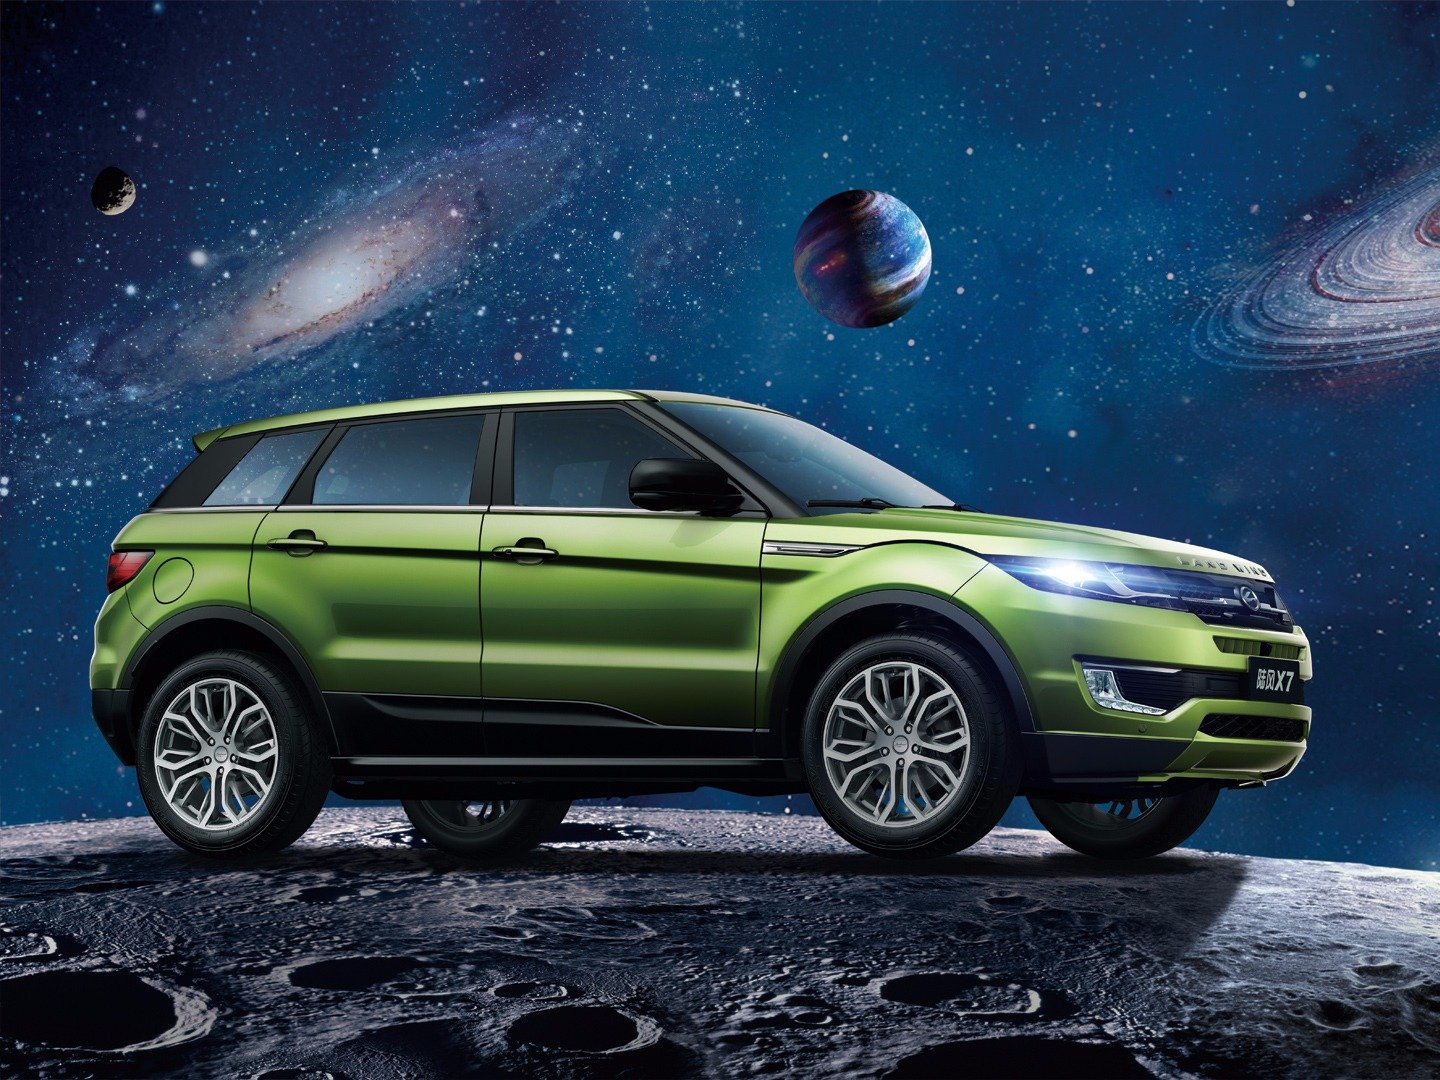 LandWind X7, a knockoff for Land Rover's Evoque SUV sells for about $21,000 Image: LandWind